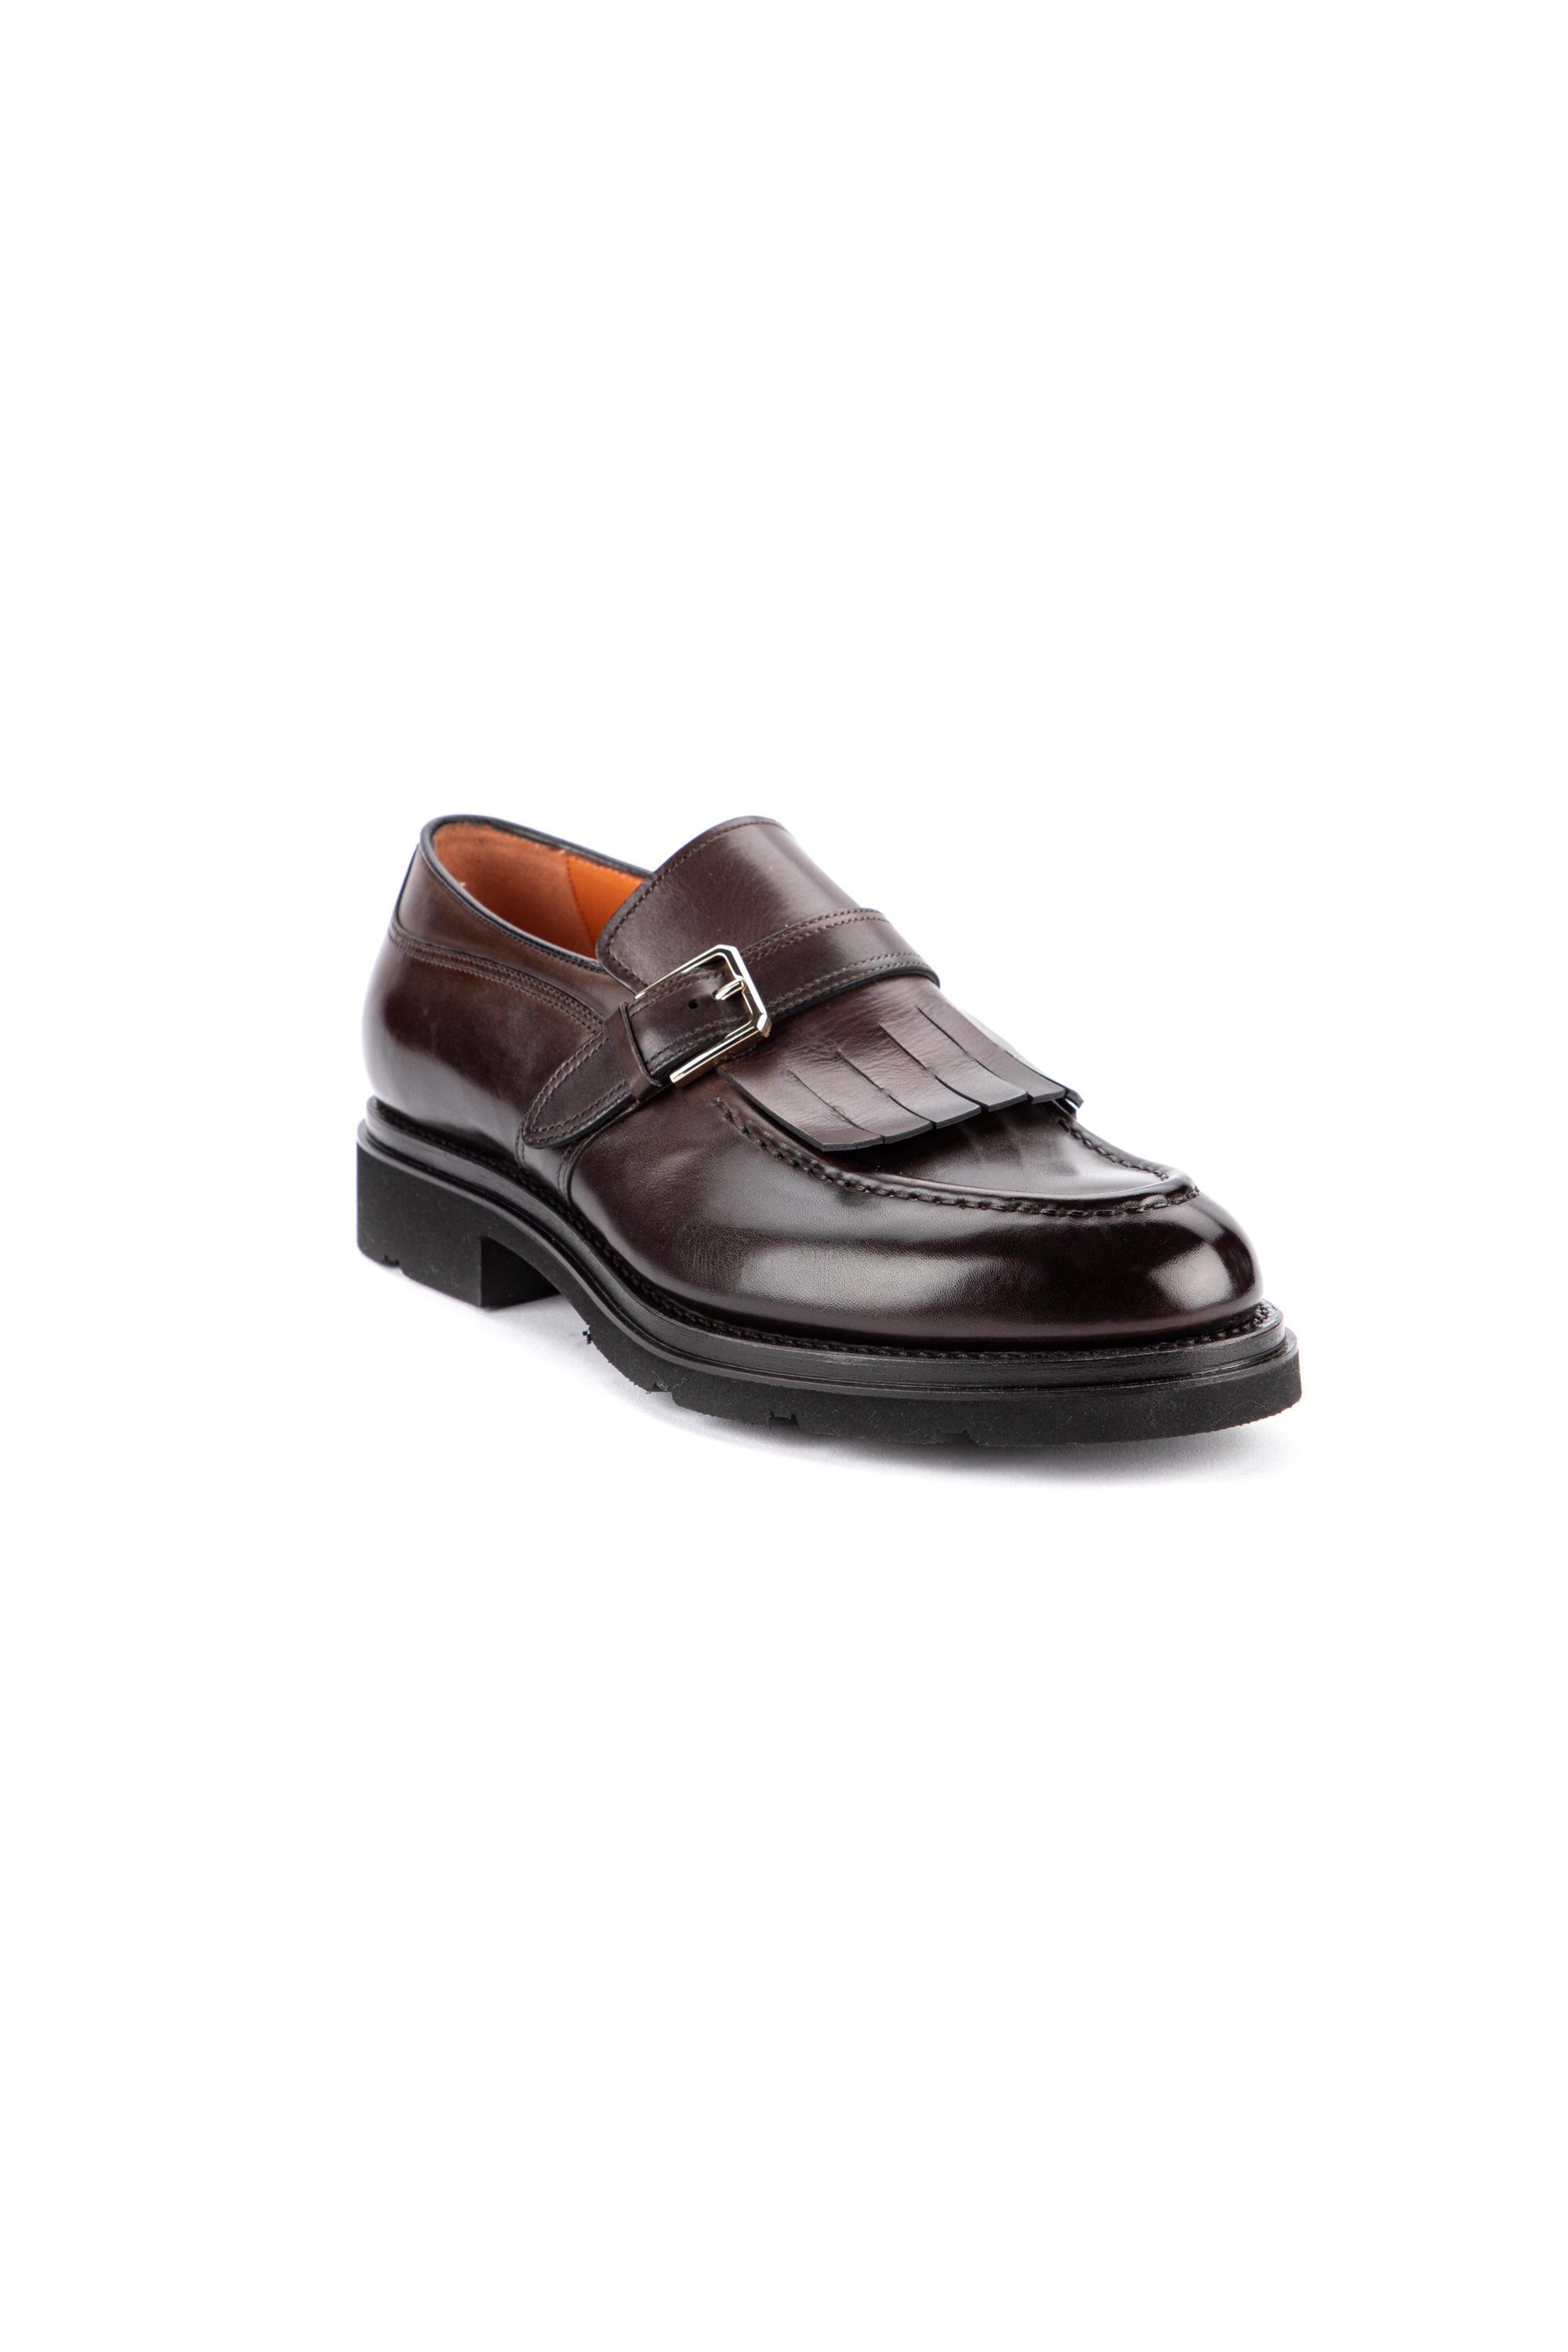 Single buckle leather shoe with fringes